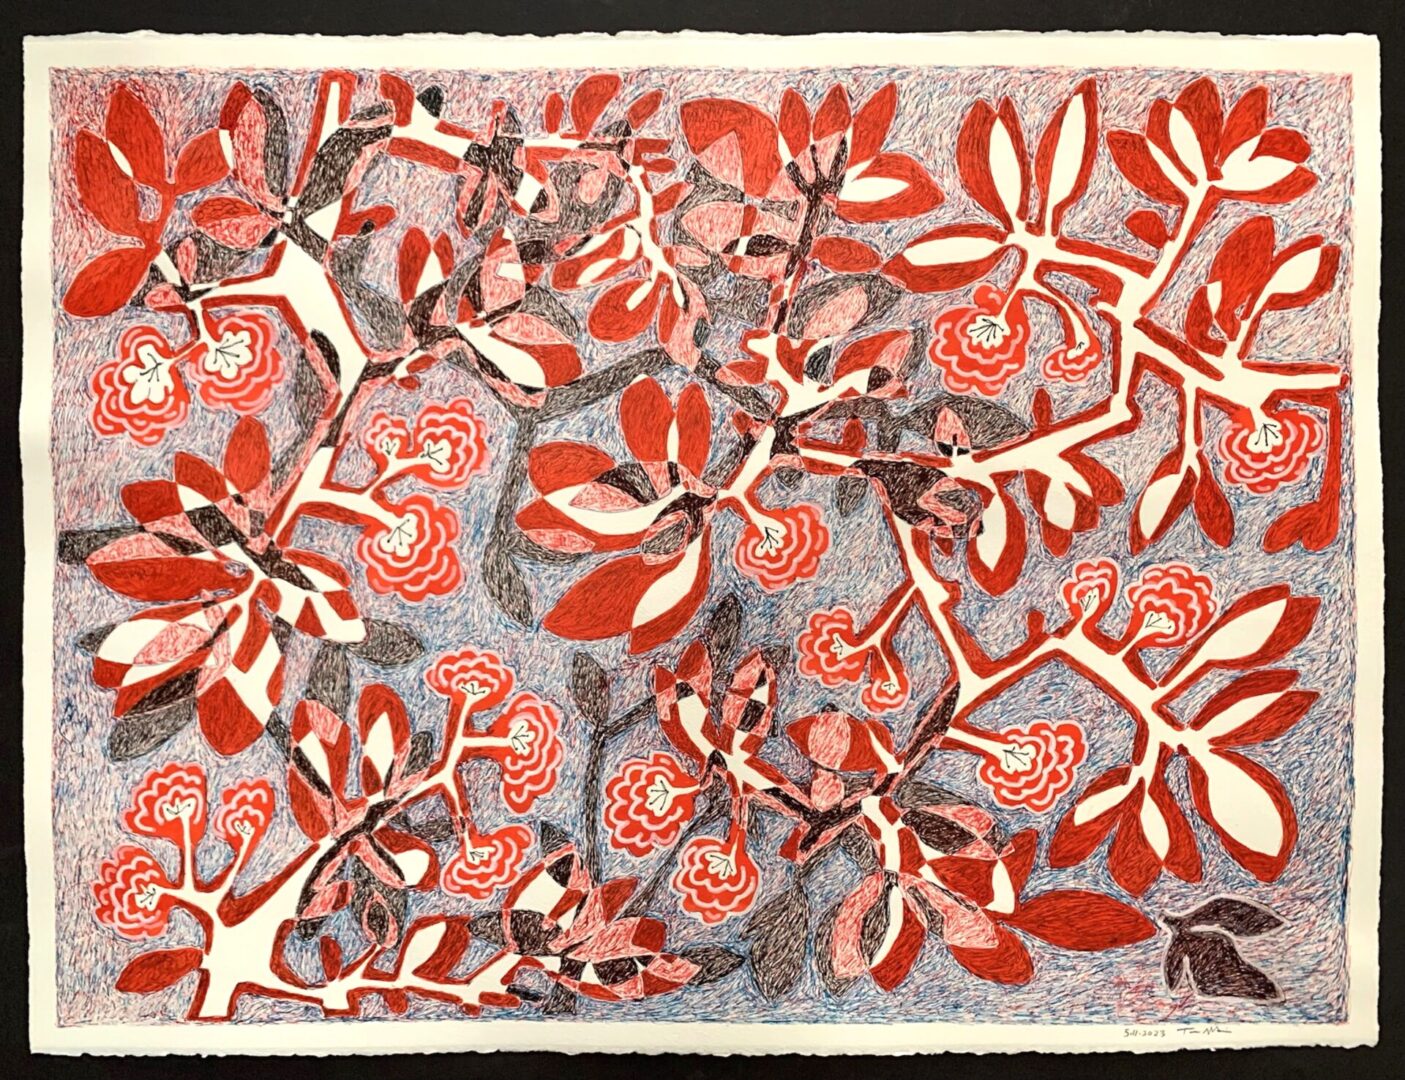 A painting of red and white leaves on a gray background.